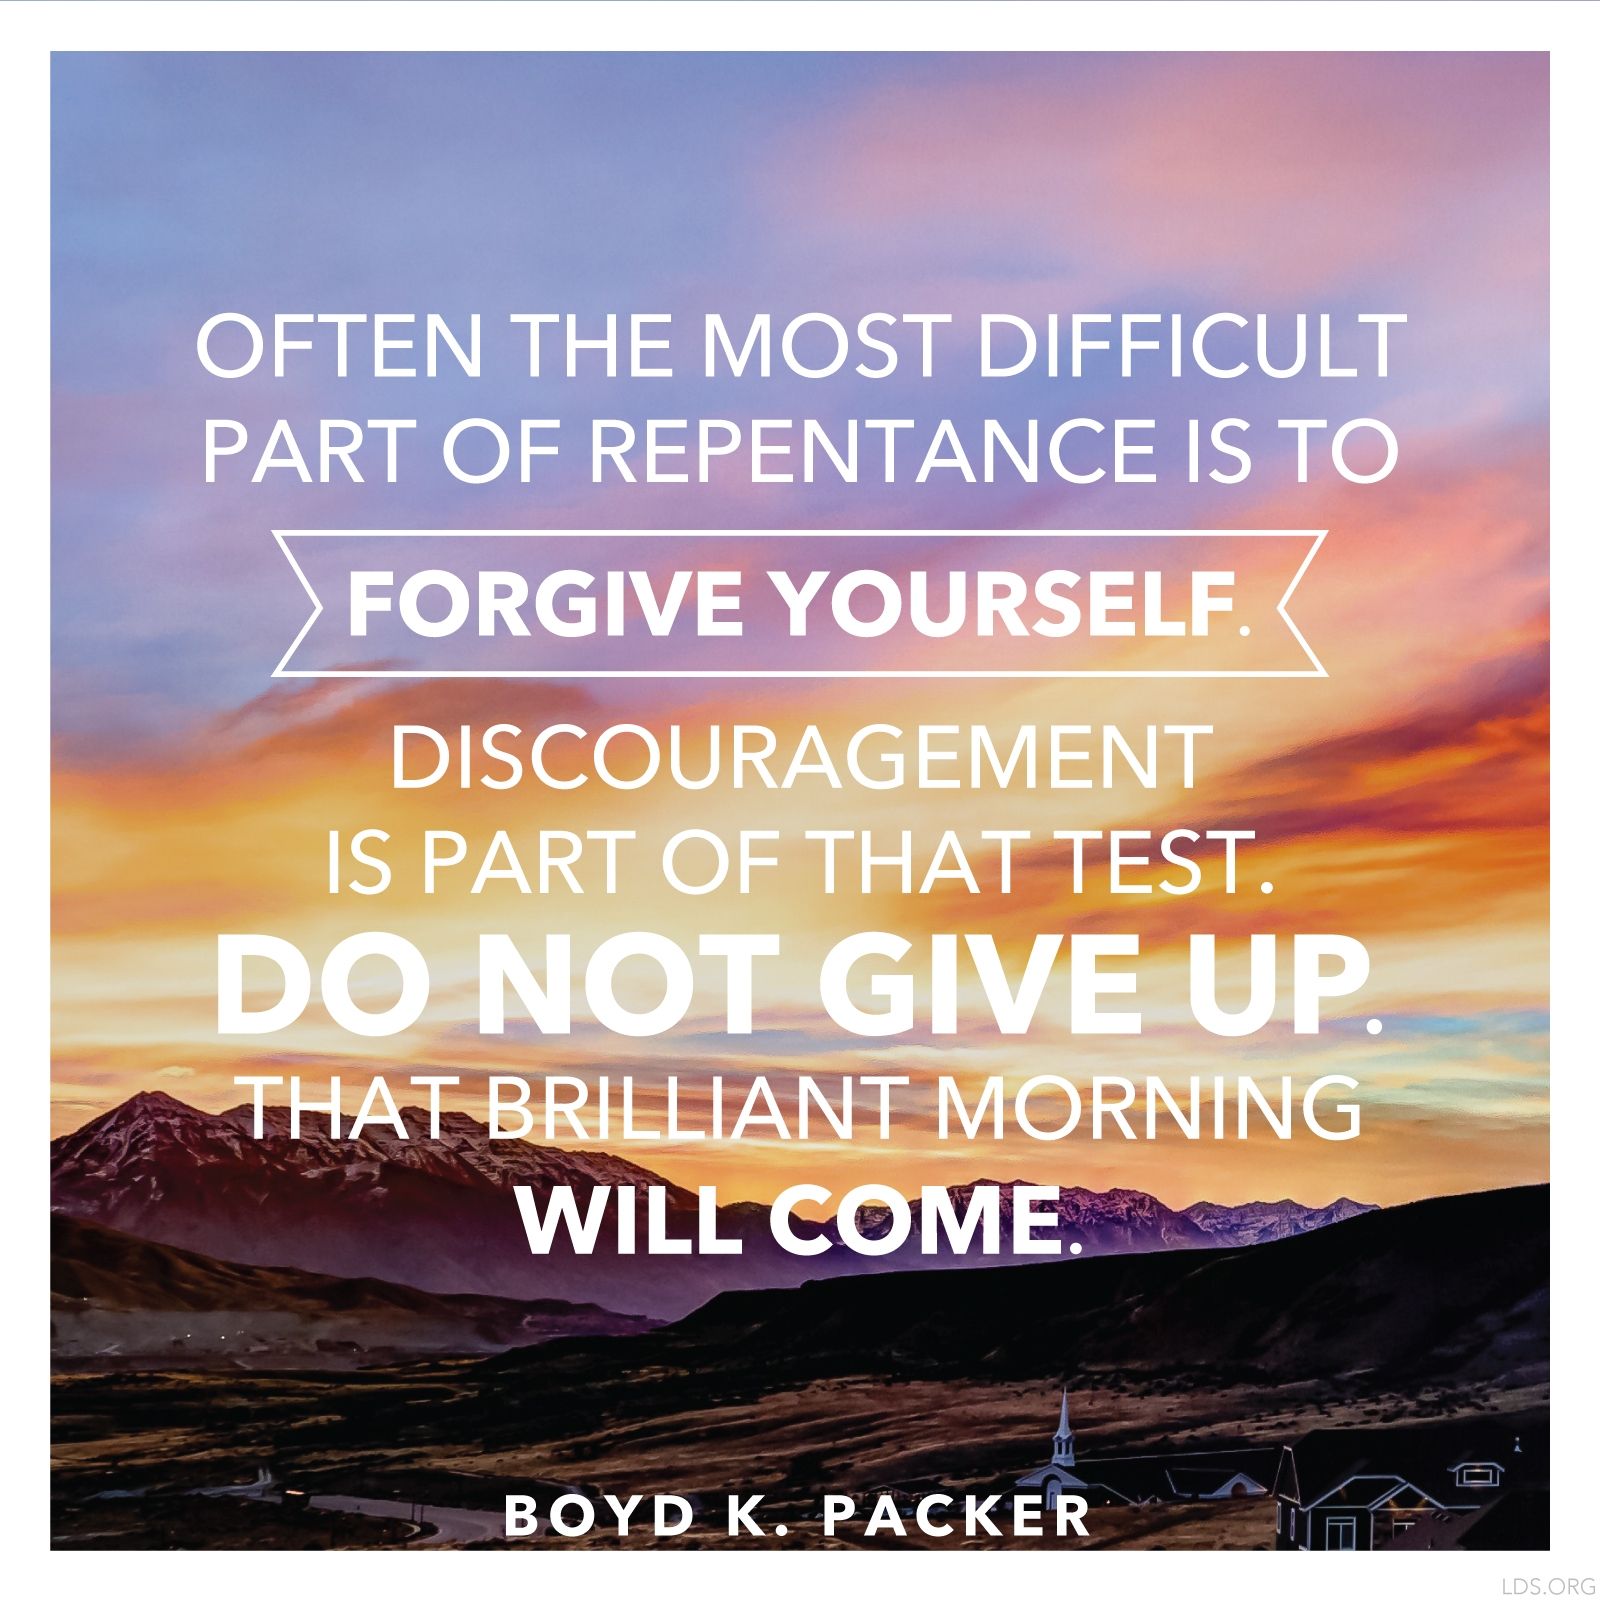 “Often the most difficult part of repentance is to forgive yourself. Discouragement is part of that test. Do not give up. That brilliant morning will come.”—President Boyd K. Packer, “The Brilliant Morning of Forgiveness” © See Individual Images ipCode 1.